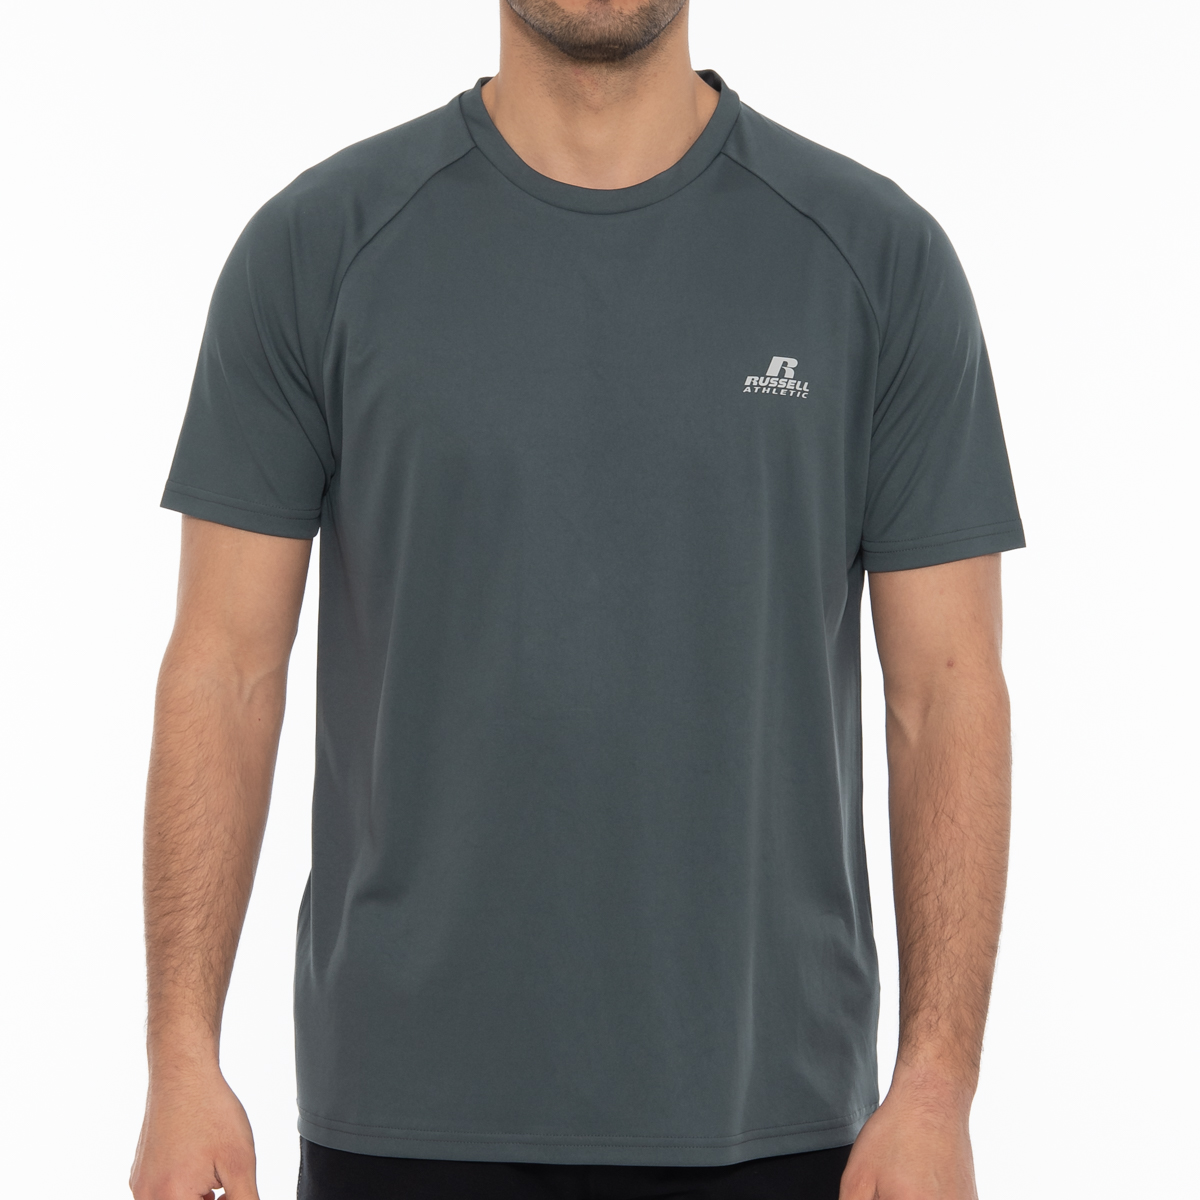 Russell Athletic - SS TECHNICAL T-SHIRT - DARK SLATE